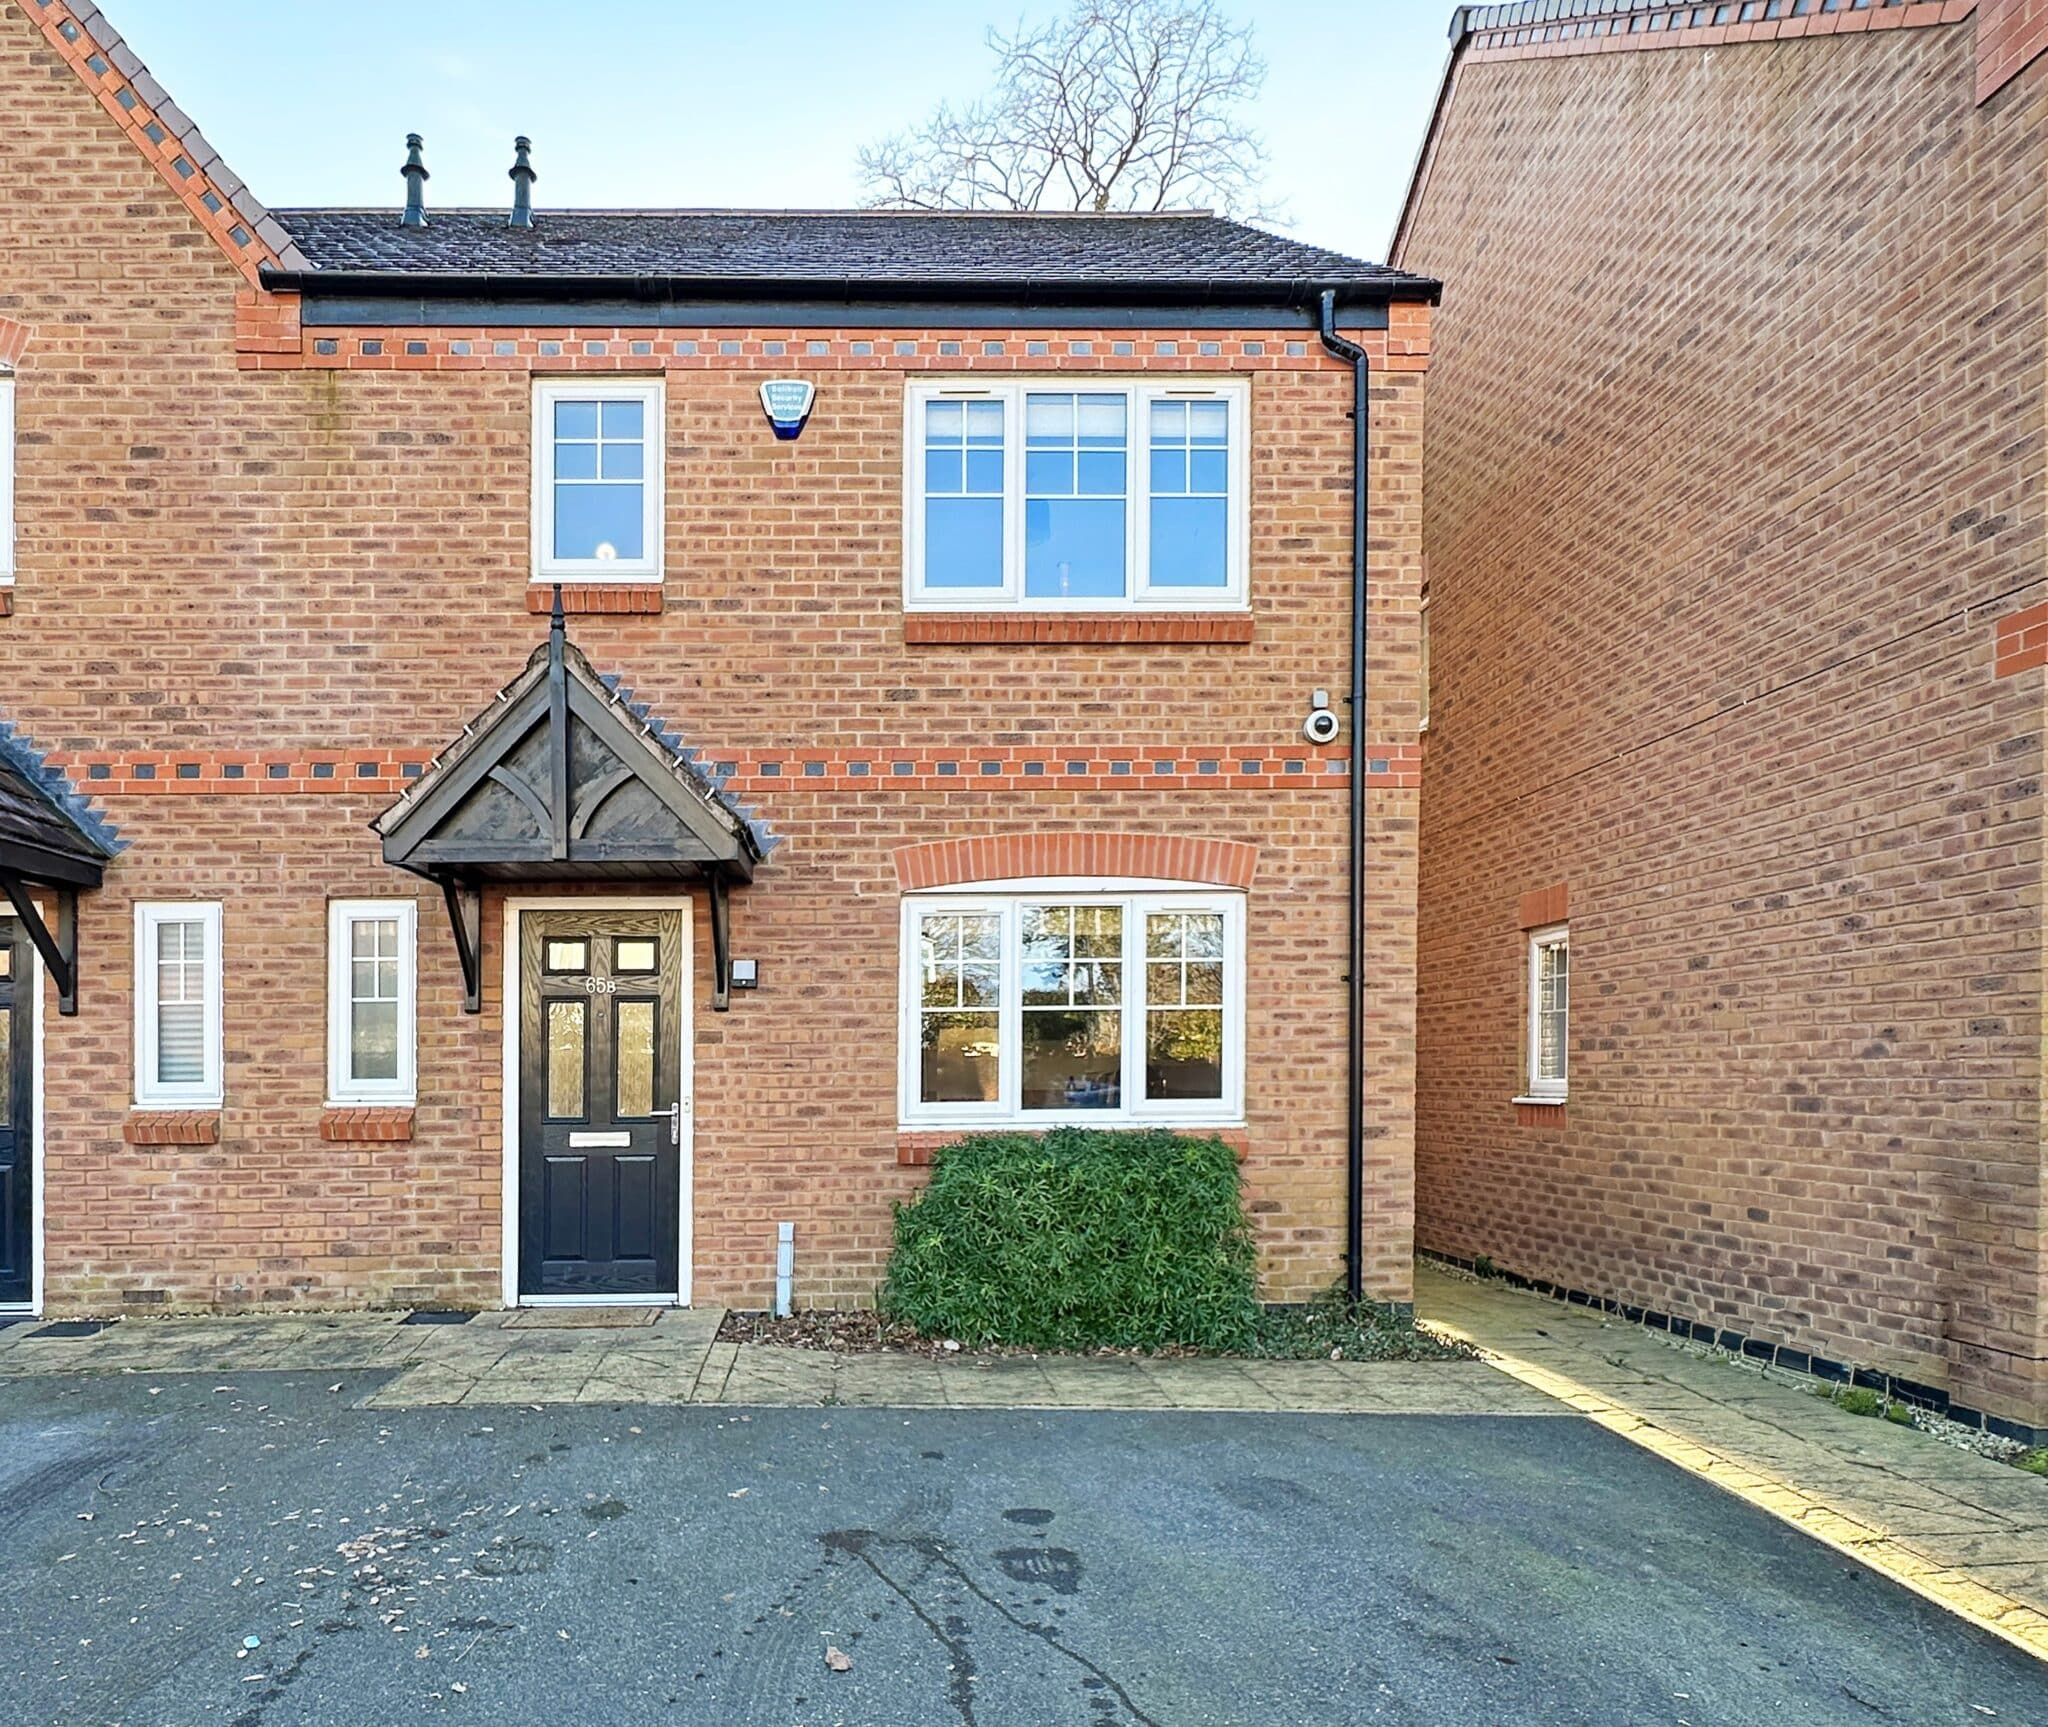 65b Four Ashes Road, Bentley Heath, Solihull, Solihull, B93 8LY